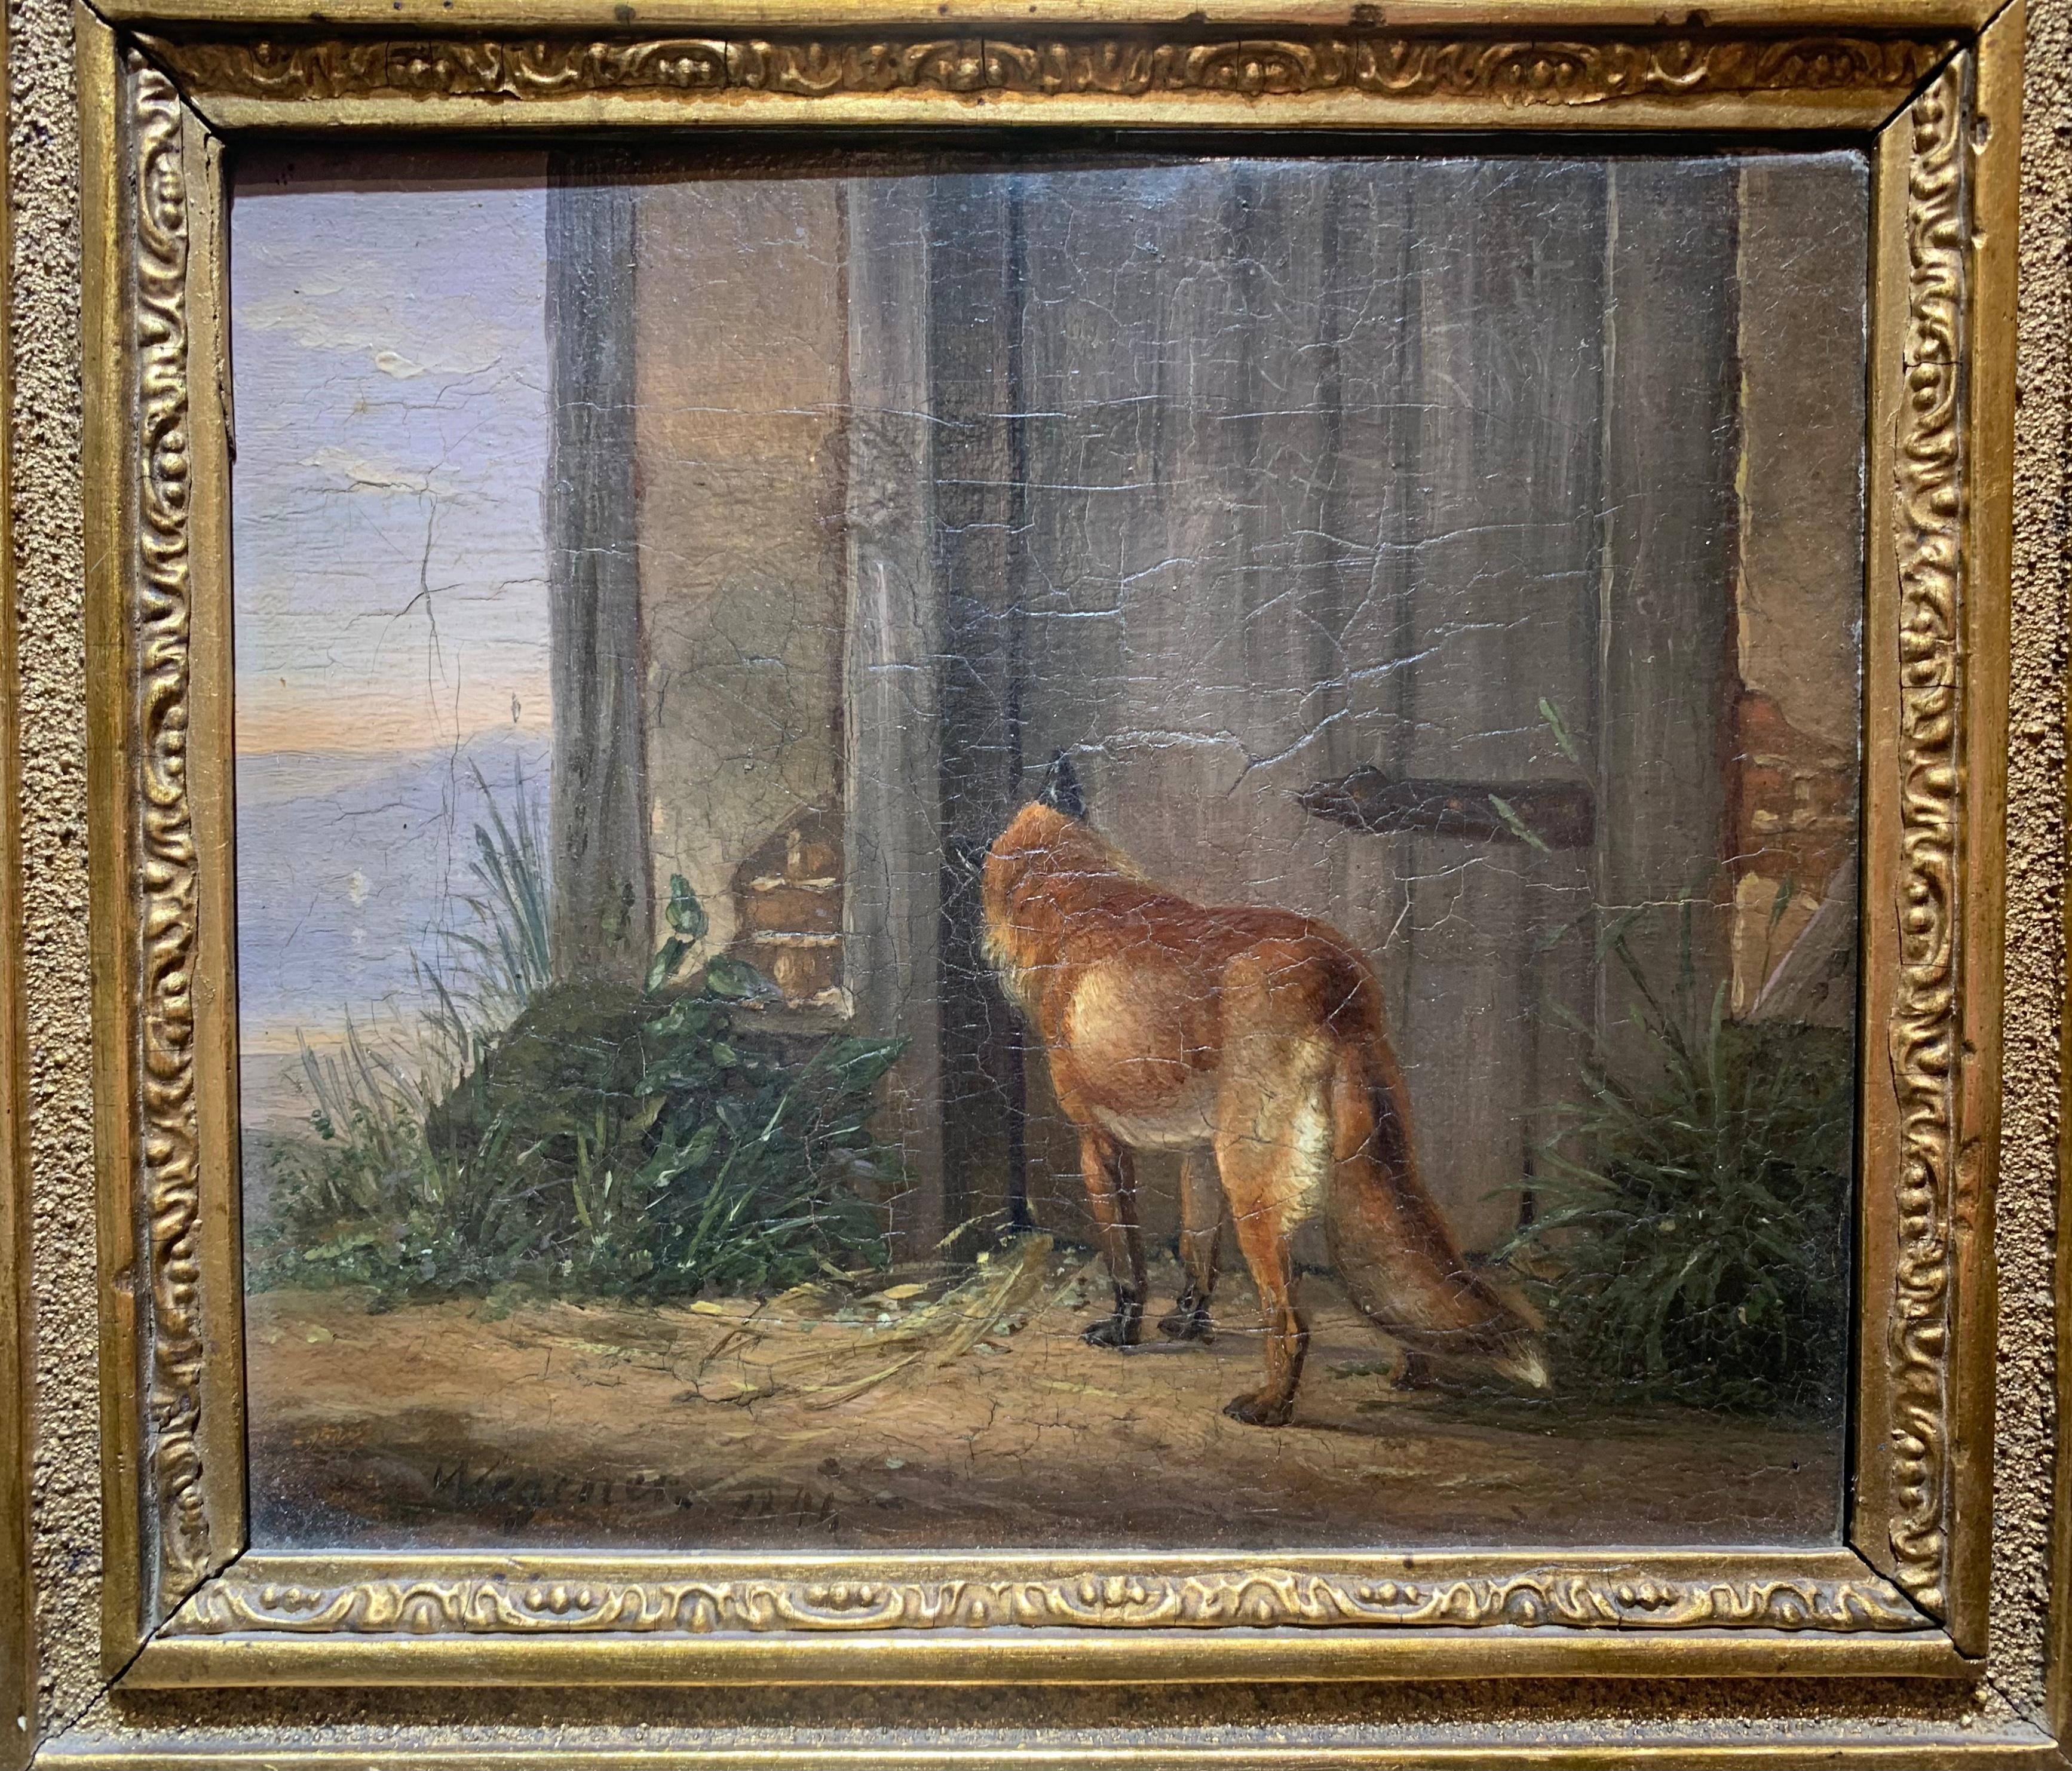 The Fox Hunting a Prey. Painting signed Wegener, dated 1841. 2